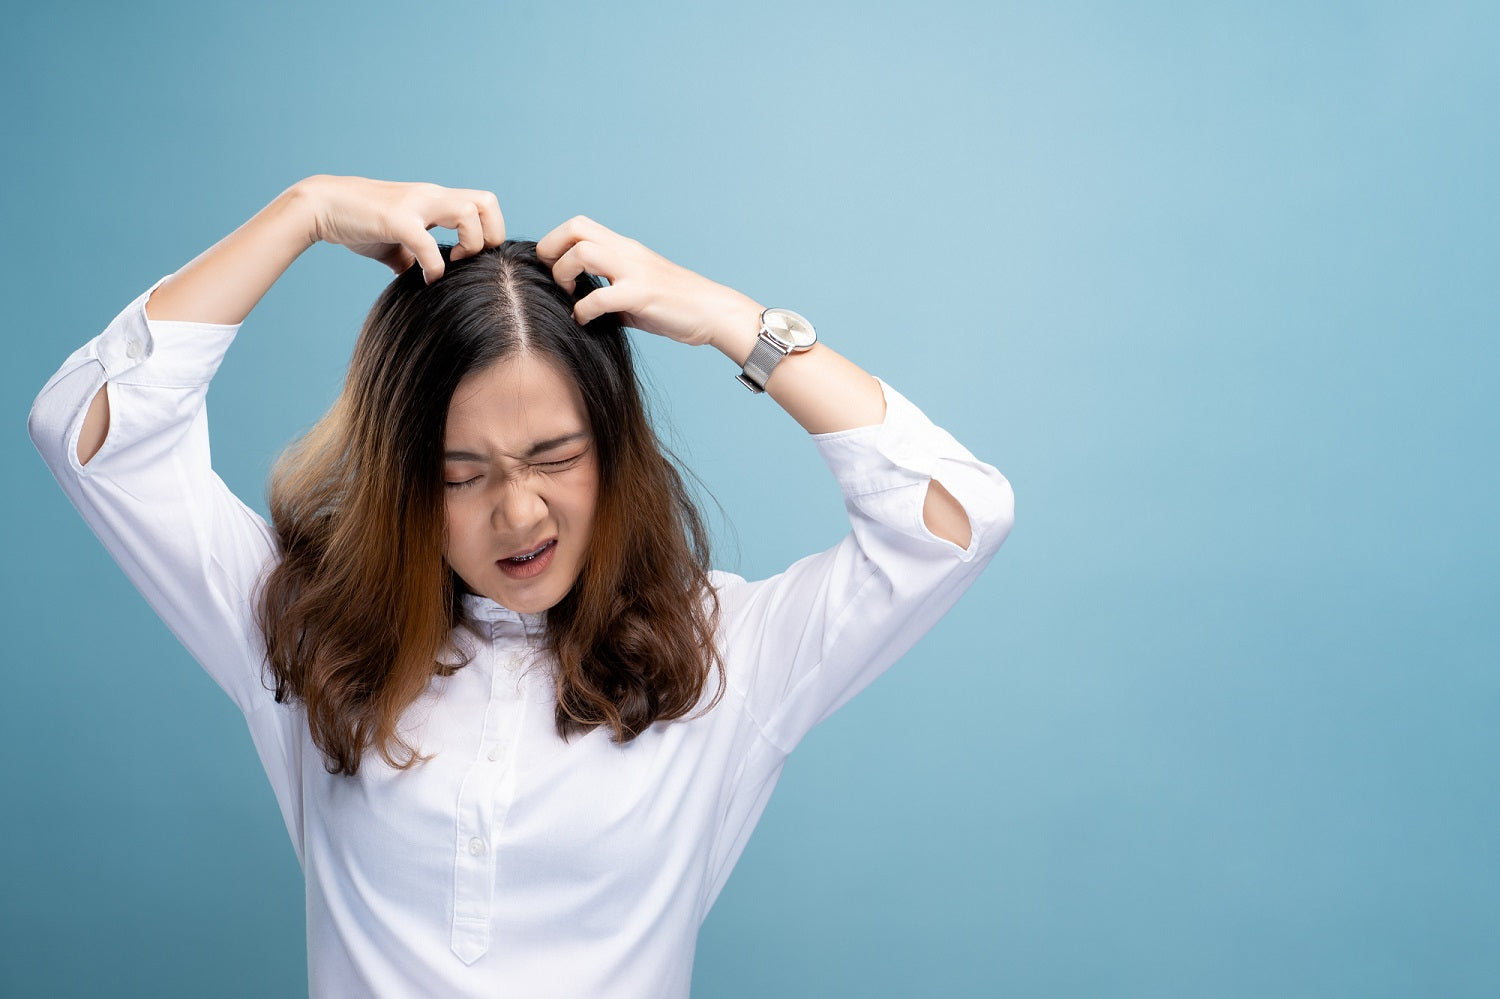 How Do I Treat Sensitive Scalp? - Top 6 Tips for Soothing and Managing Scalp Sensitivity